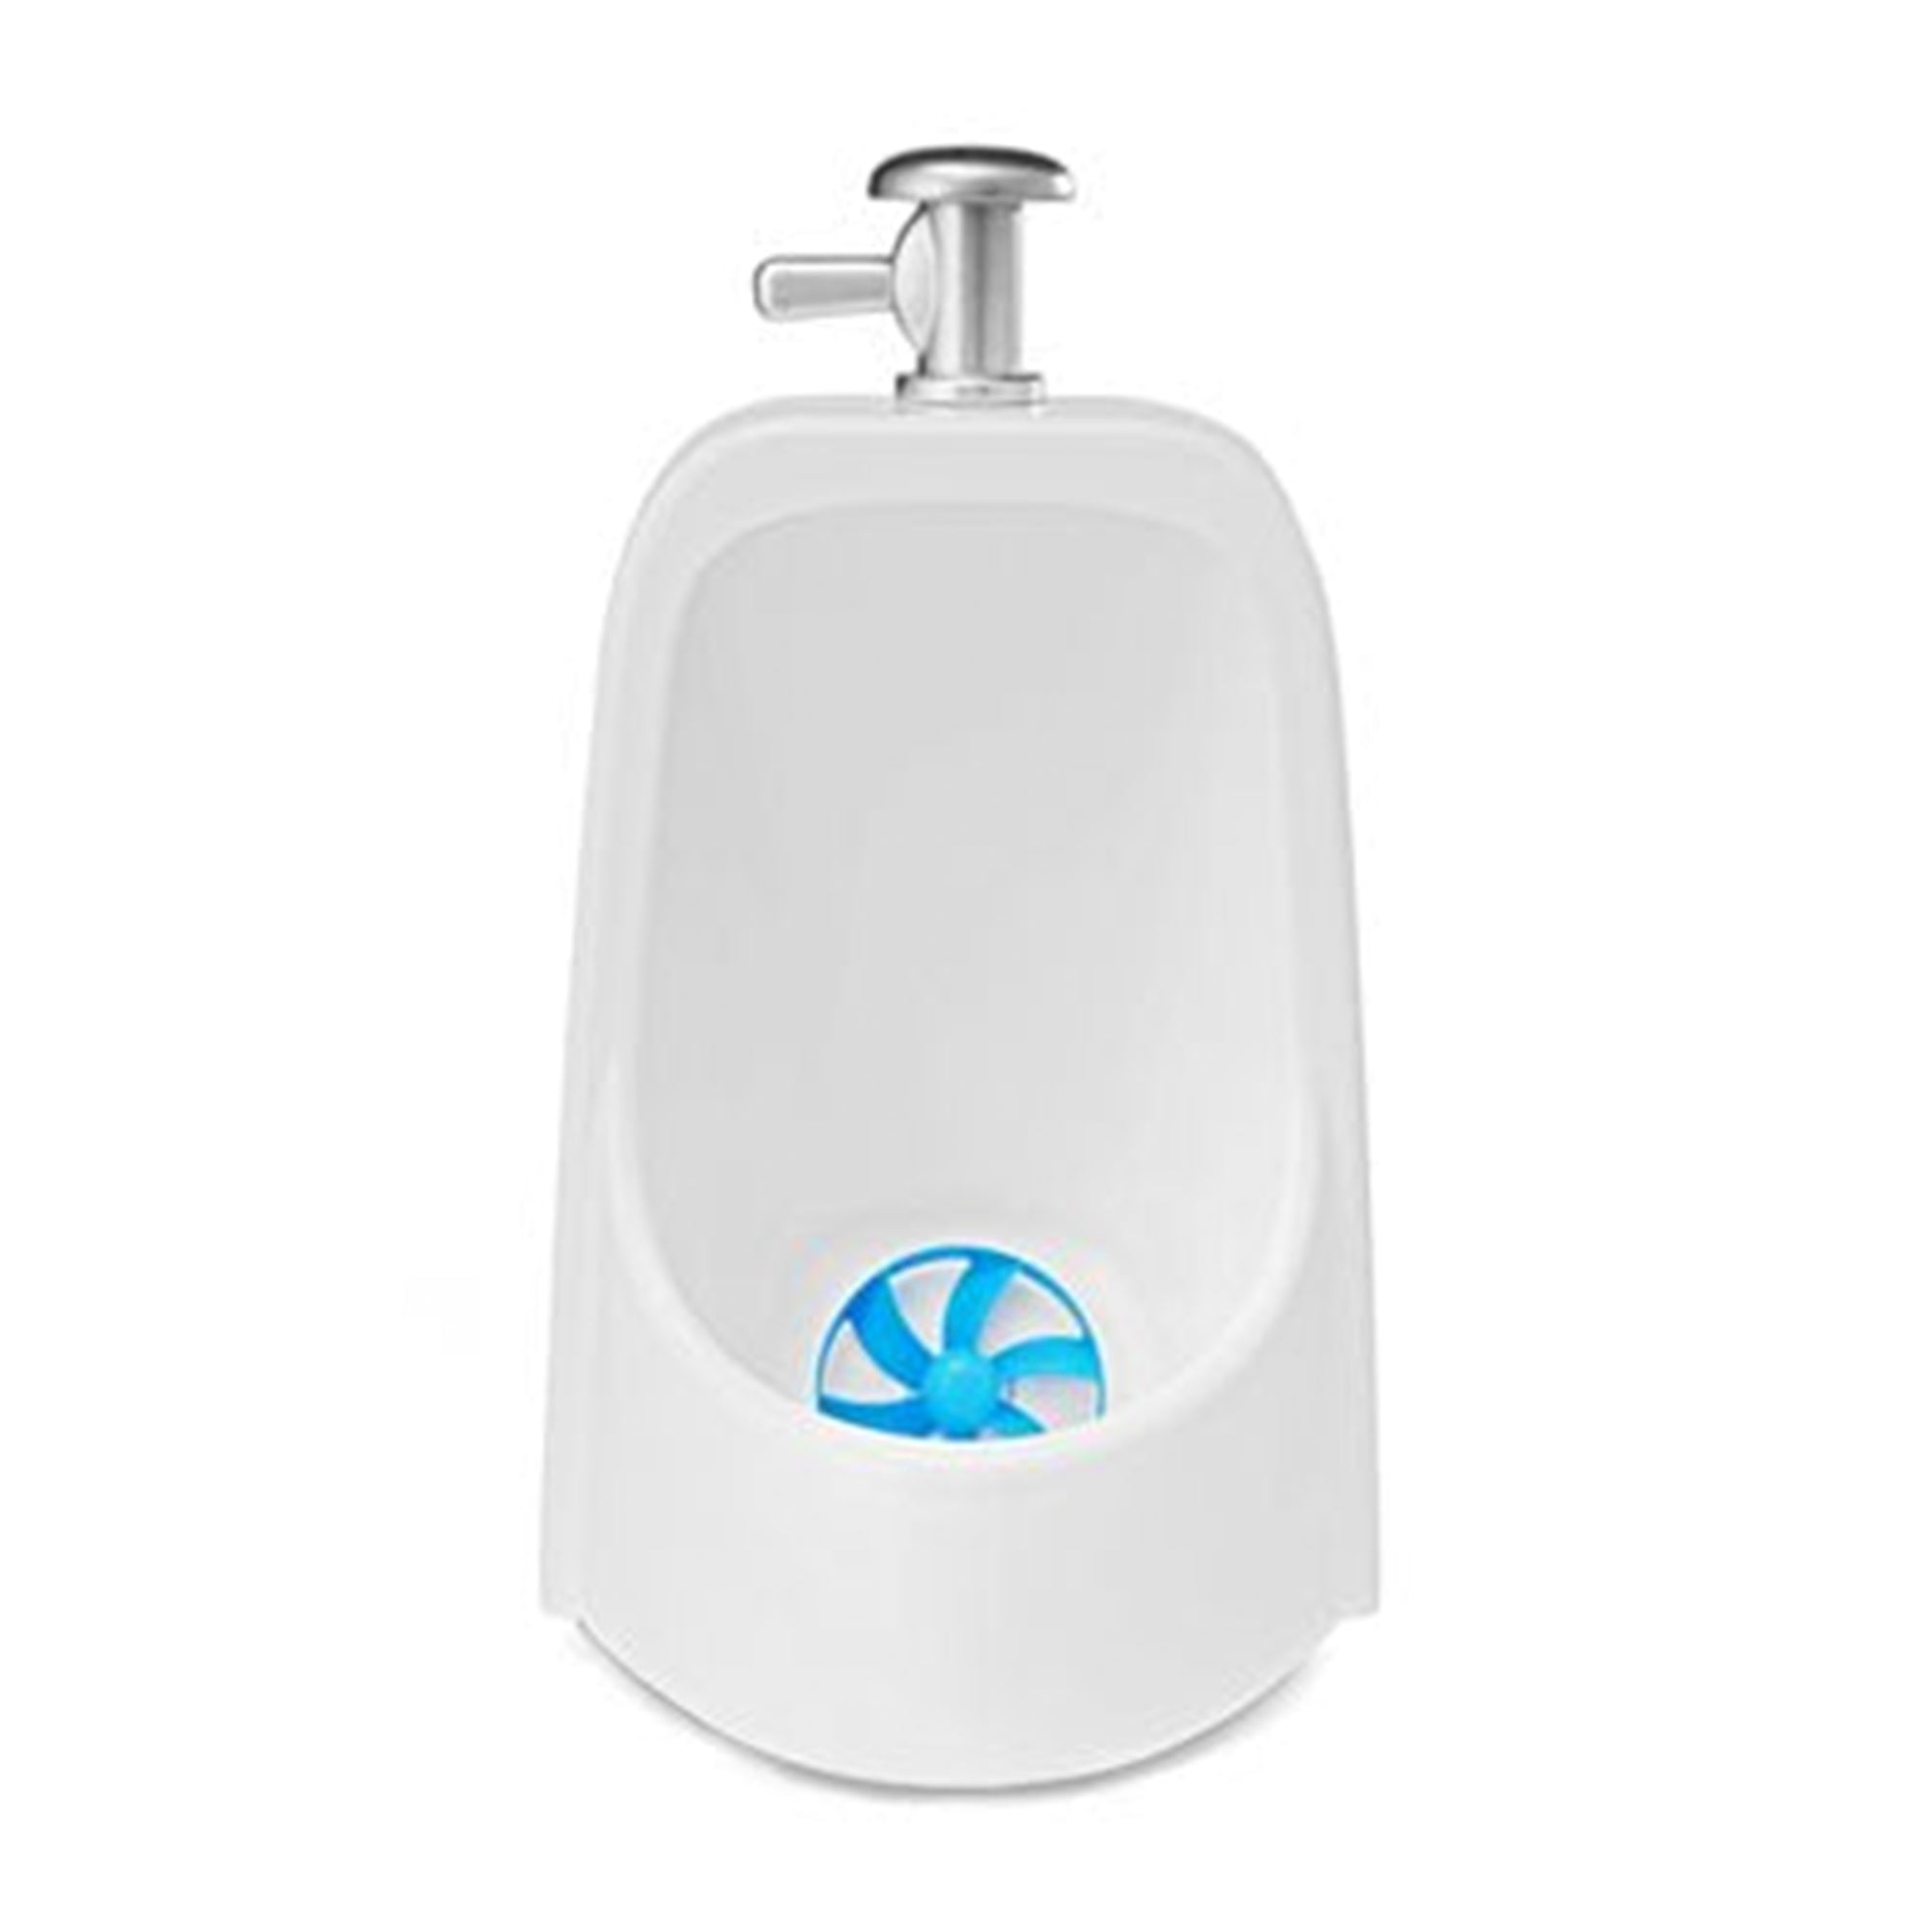 Summer Infant My Size Urinal 1L White || 18months to 48months - Toys4All.in